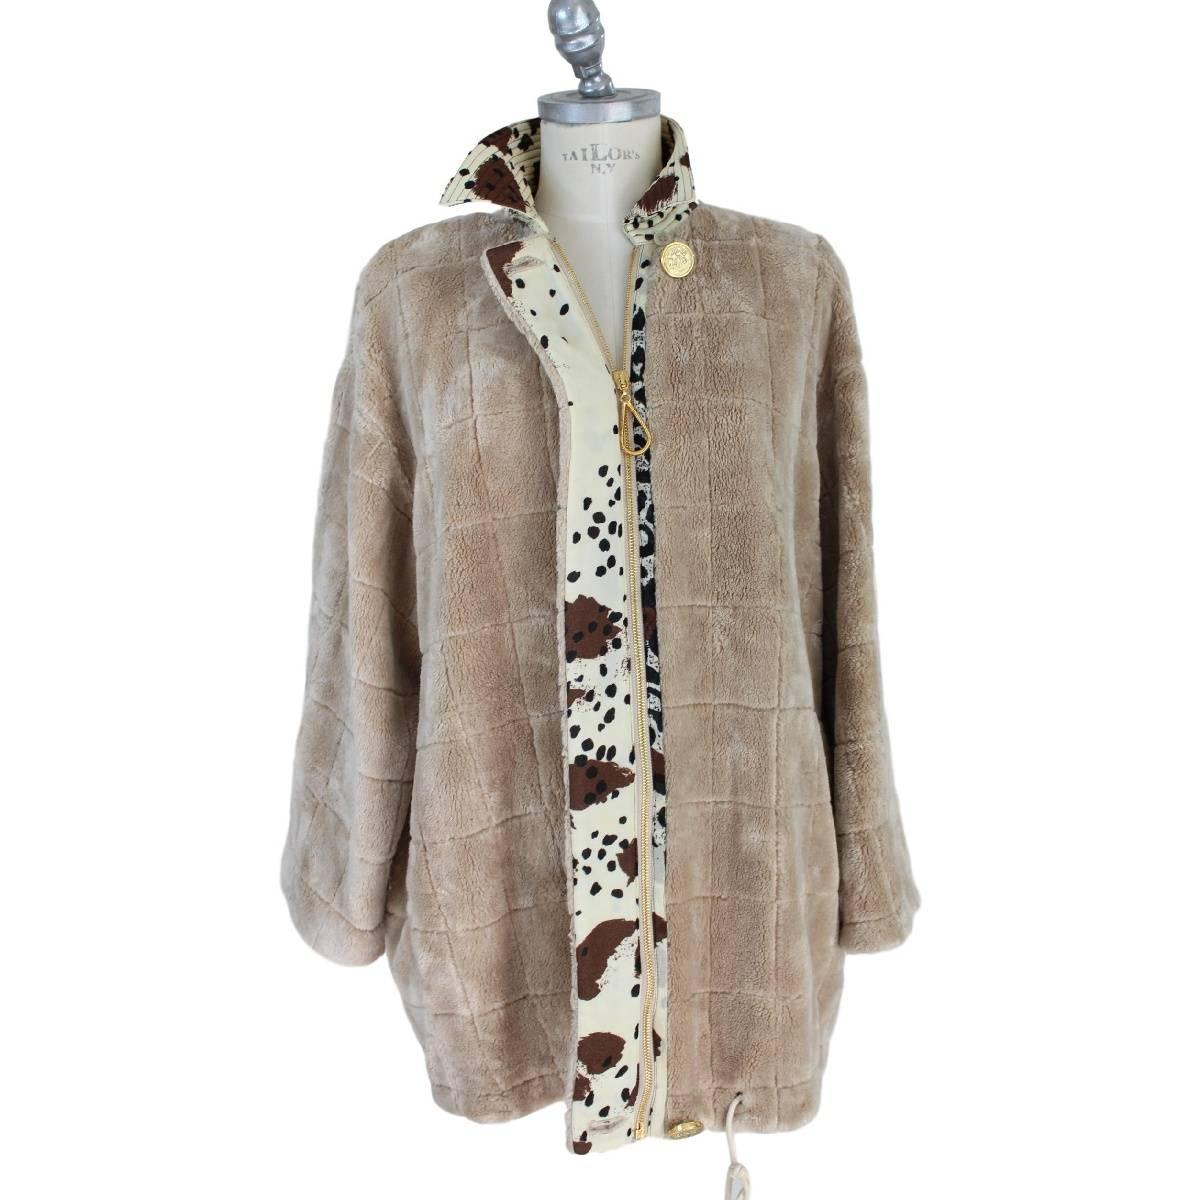 Gianfranco Ferrè faux fur for women. Beige with detachable hood. Made of 100% viscose. Italian size 40, made in Italy. The buttons represent a famous English gold coin. Excellent vintage conditions.

Size 40 UK 6 Us 10 Uk 38 Fr 36 De

Shoulder: 42